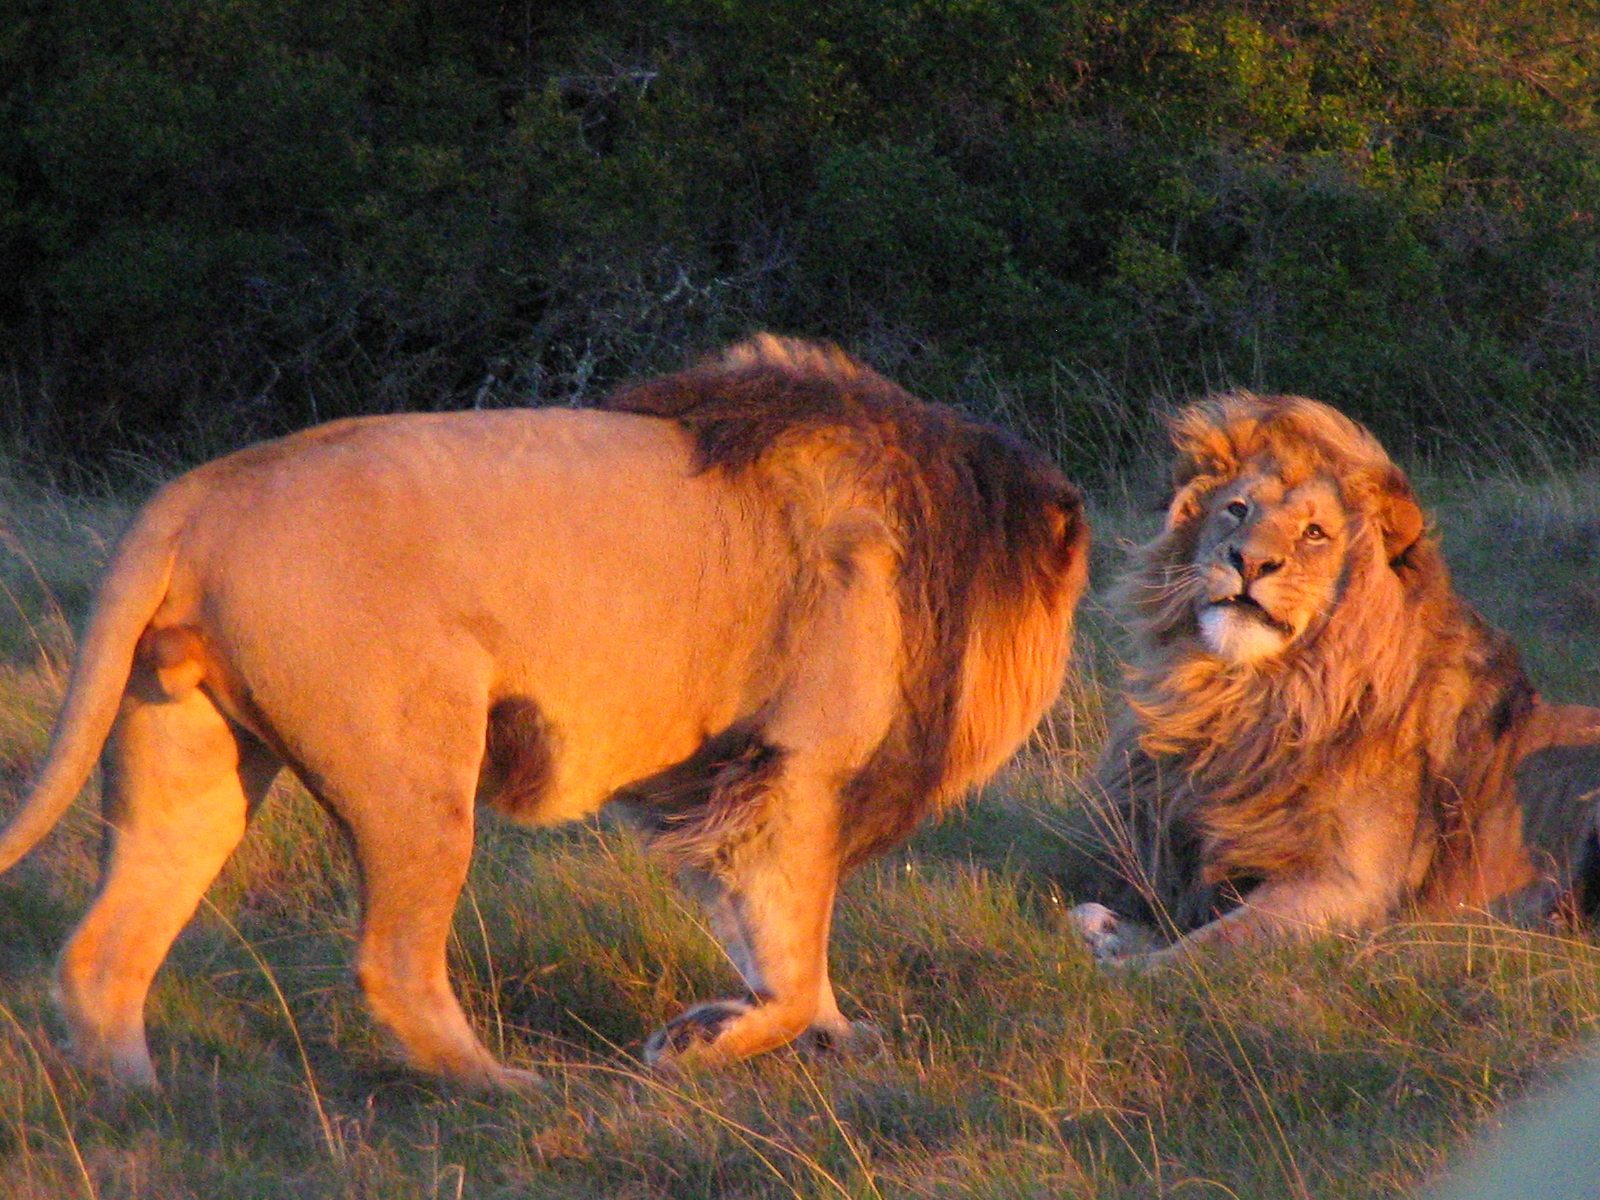 Love is love, even with lions. 